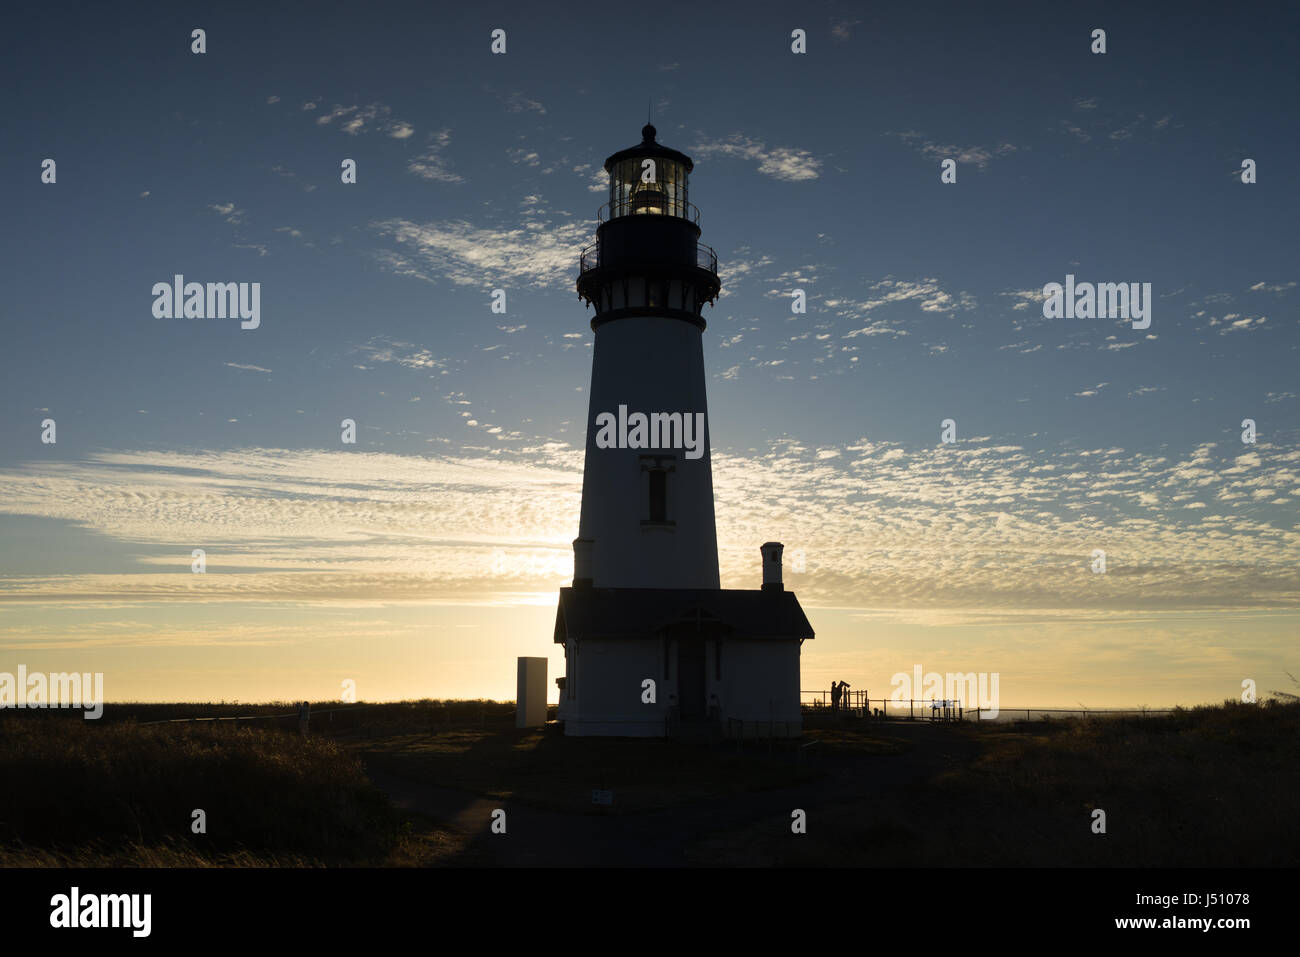 Yaquina lighthouse at sunset, August 2015 Stock Photo